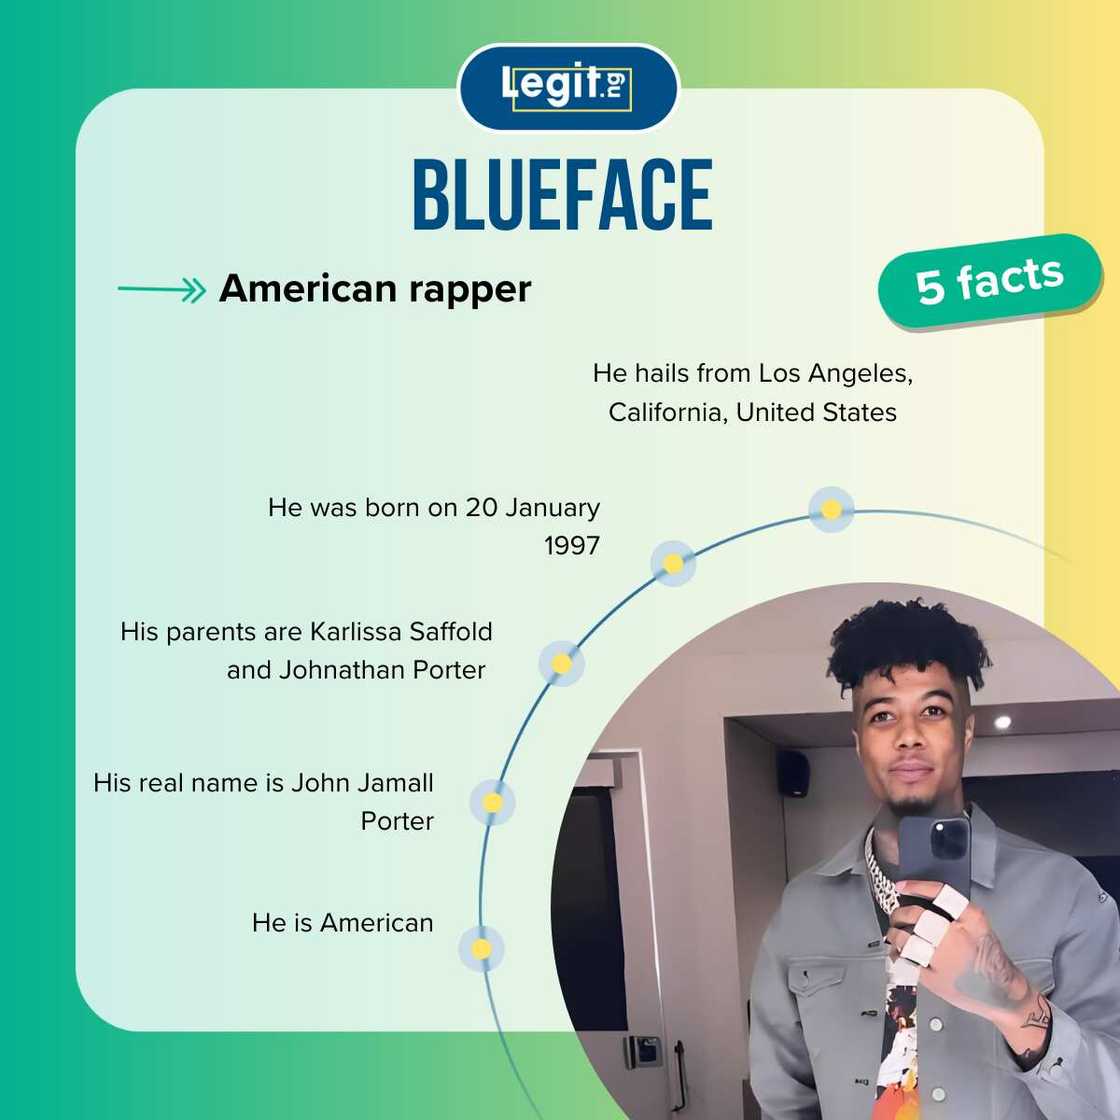 Quick facts about Blueface